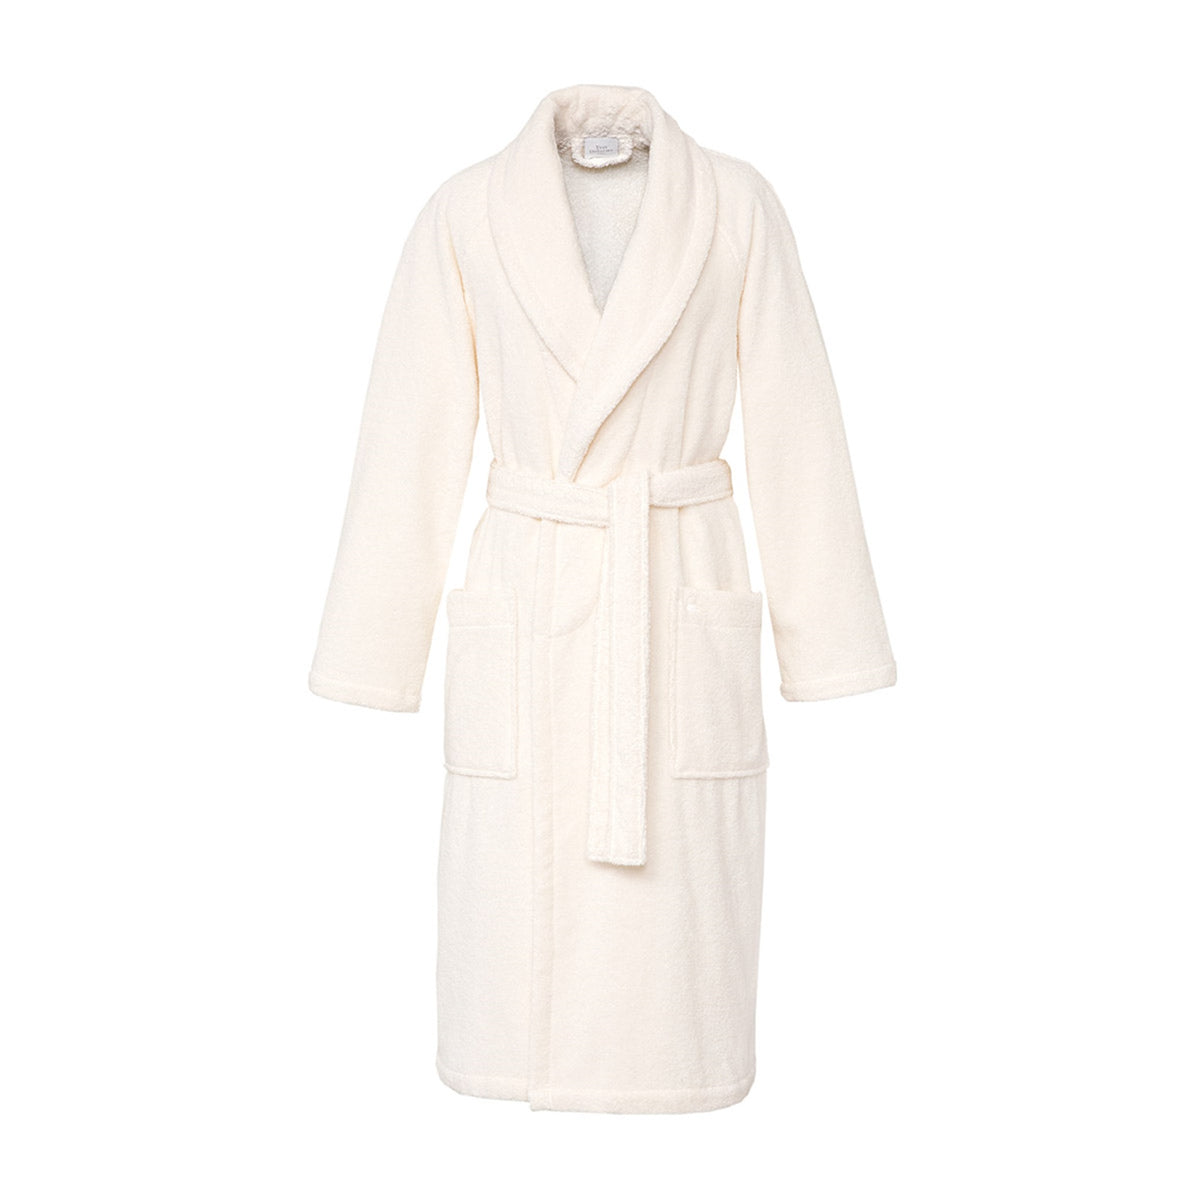 Front View of Yves Delorme Etoile Bath Robe in Color Nacre